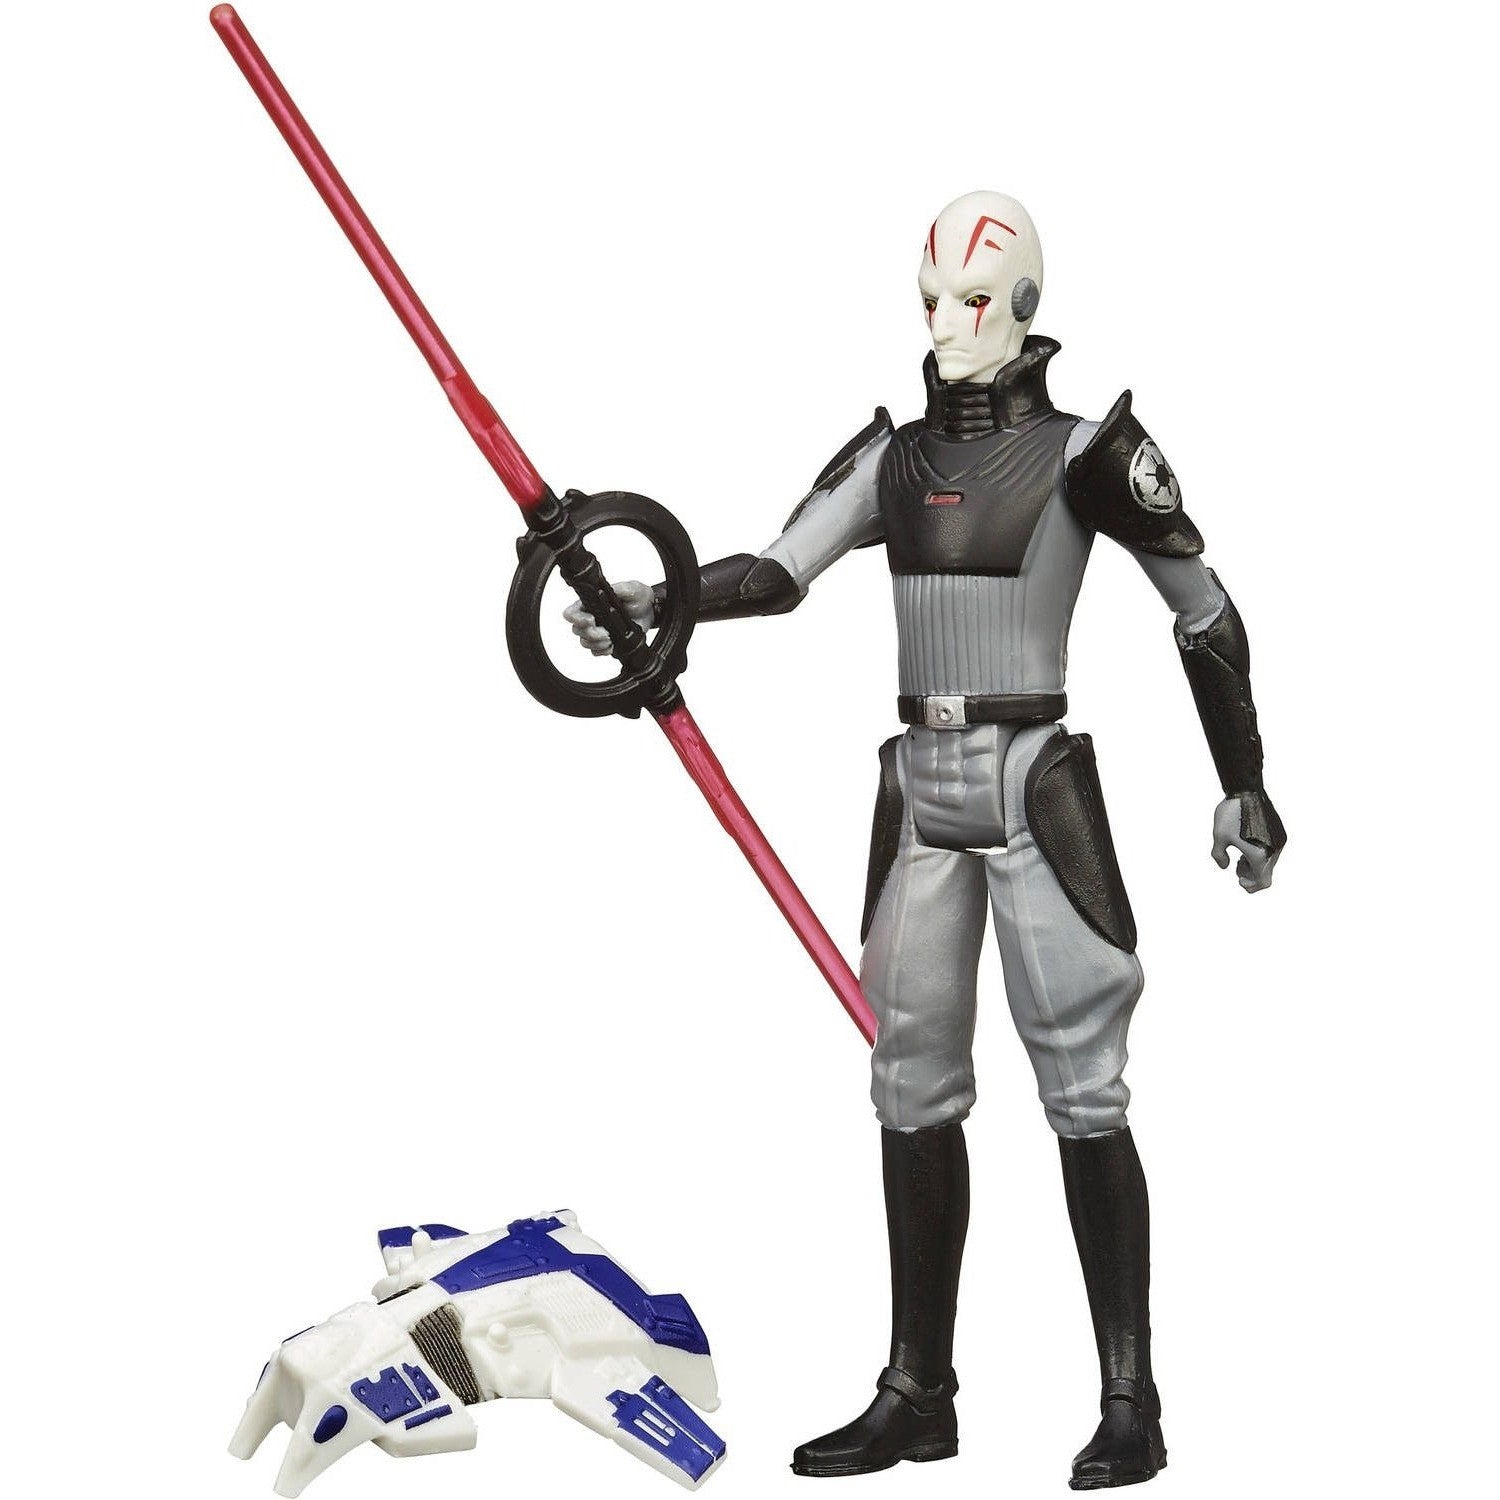  Star Wars Inquisitor Action Figure Uncanny!